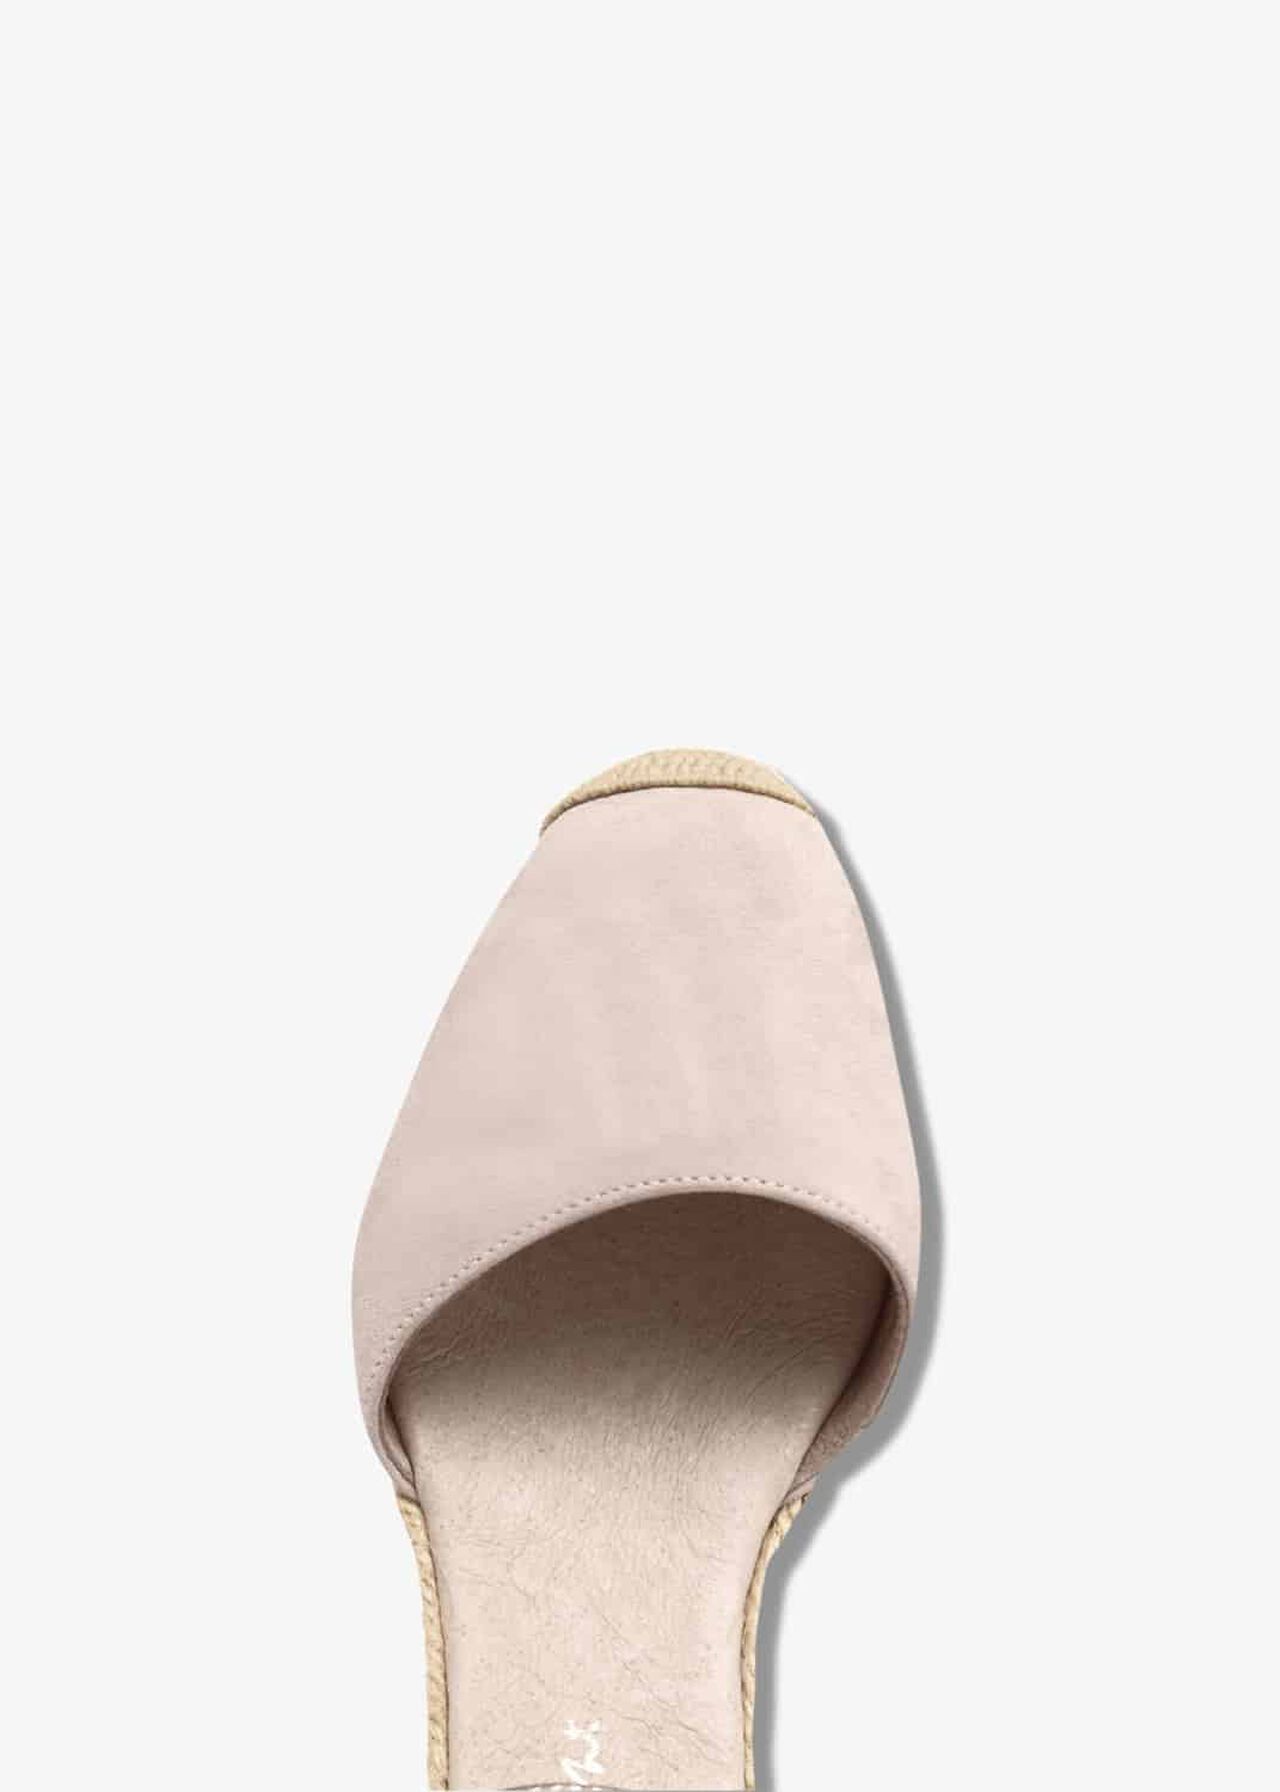 Kimmy Leather Espadrille Wedge Shoes